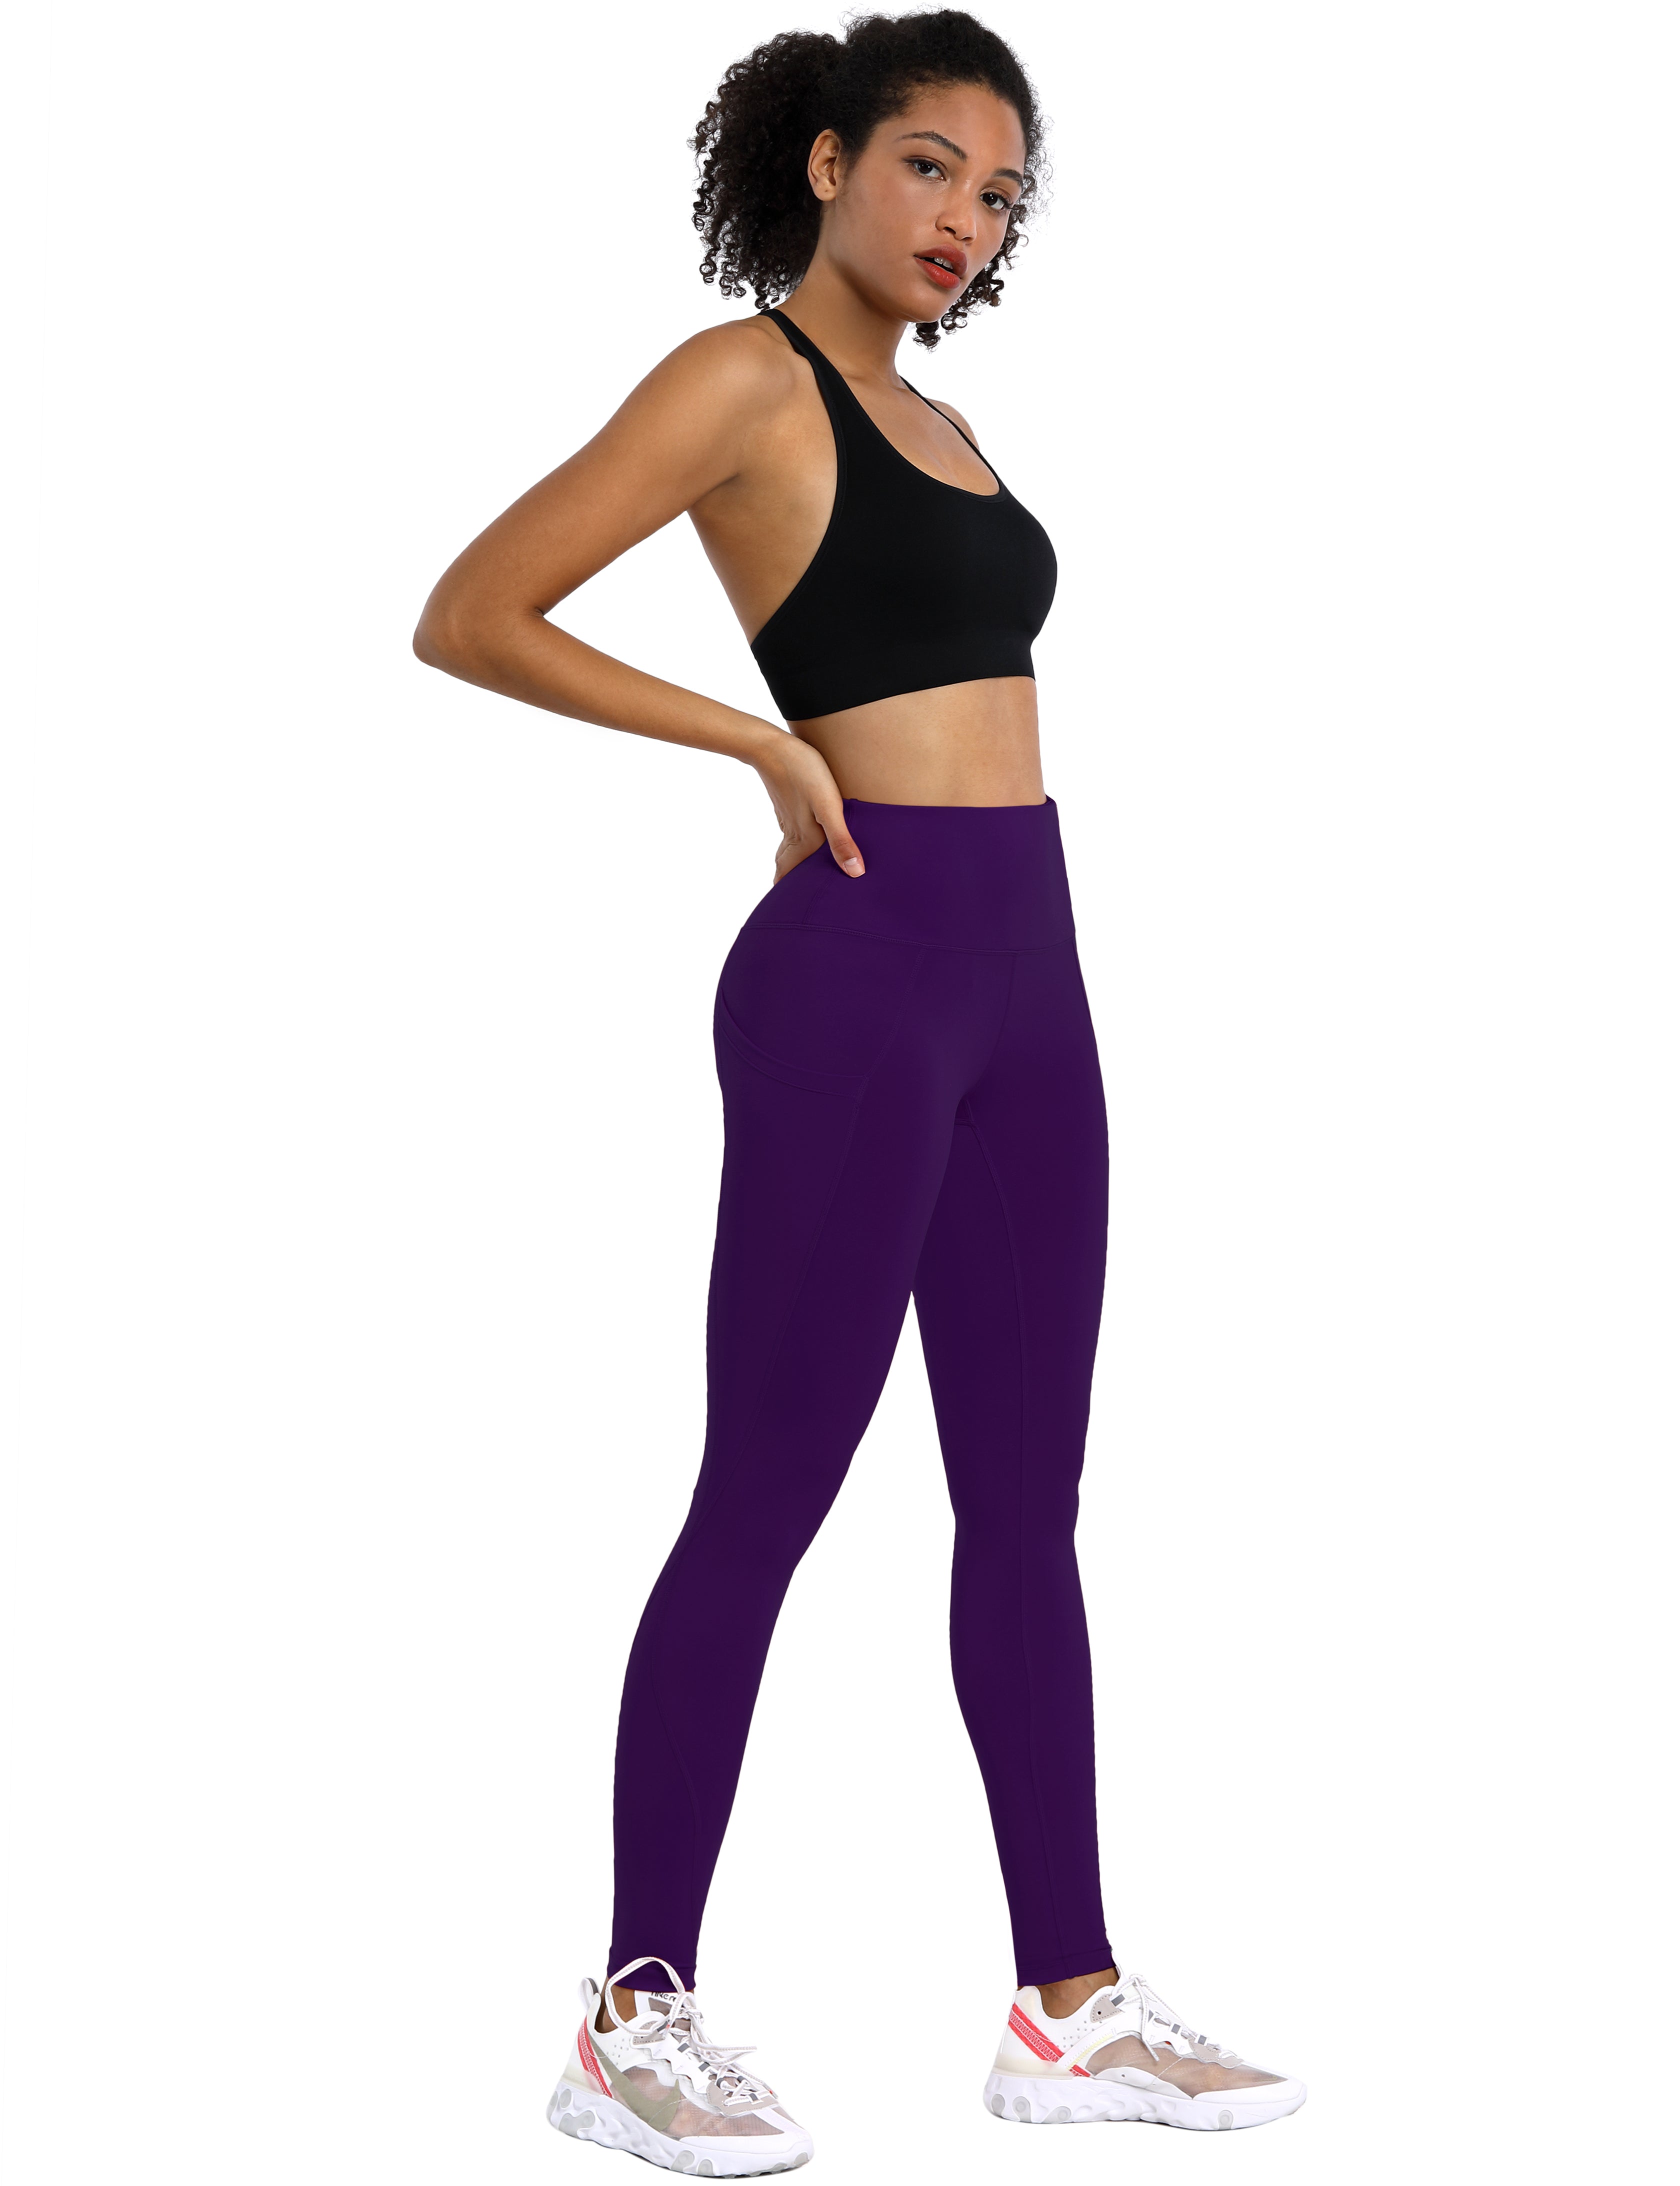 High Waist Side Pockets Pilates Pants pansypurple 75% Nylon, 25% Spandex Fabric doesn't attract lint easily 4-way stretch No see-through Moisture-wicking Tummy control Inner pocket